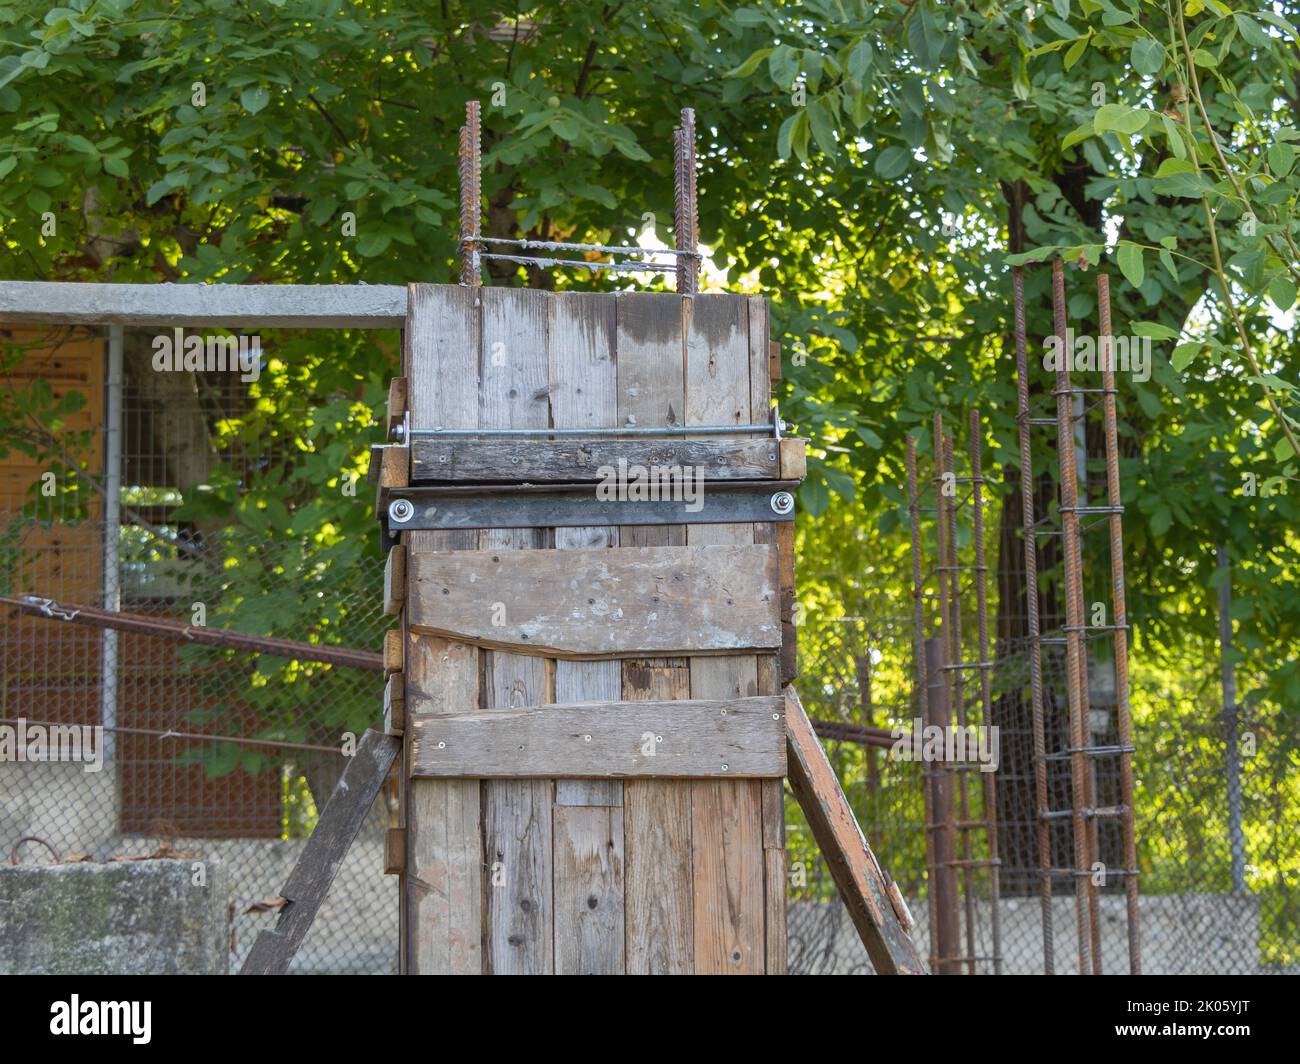 In the process of building the concrete column - wooden formwork is fixed. Green trees background Stock Photo